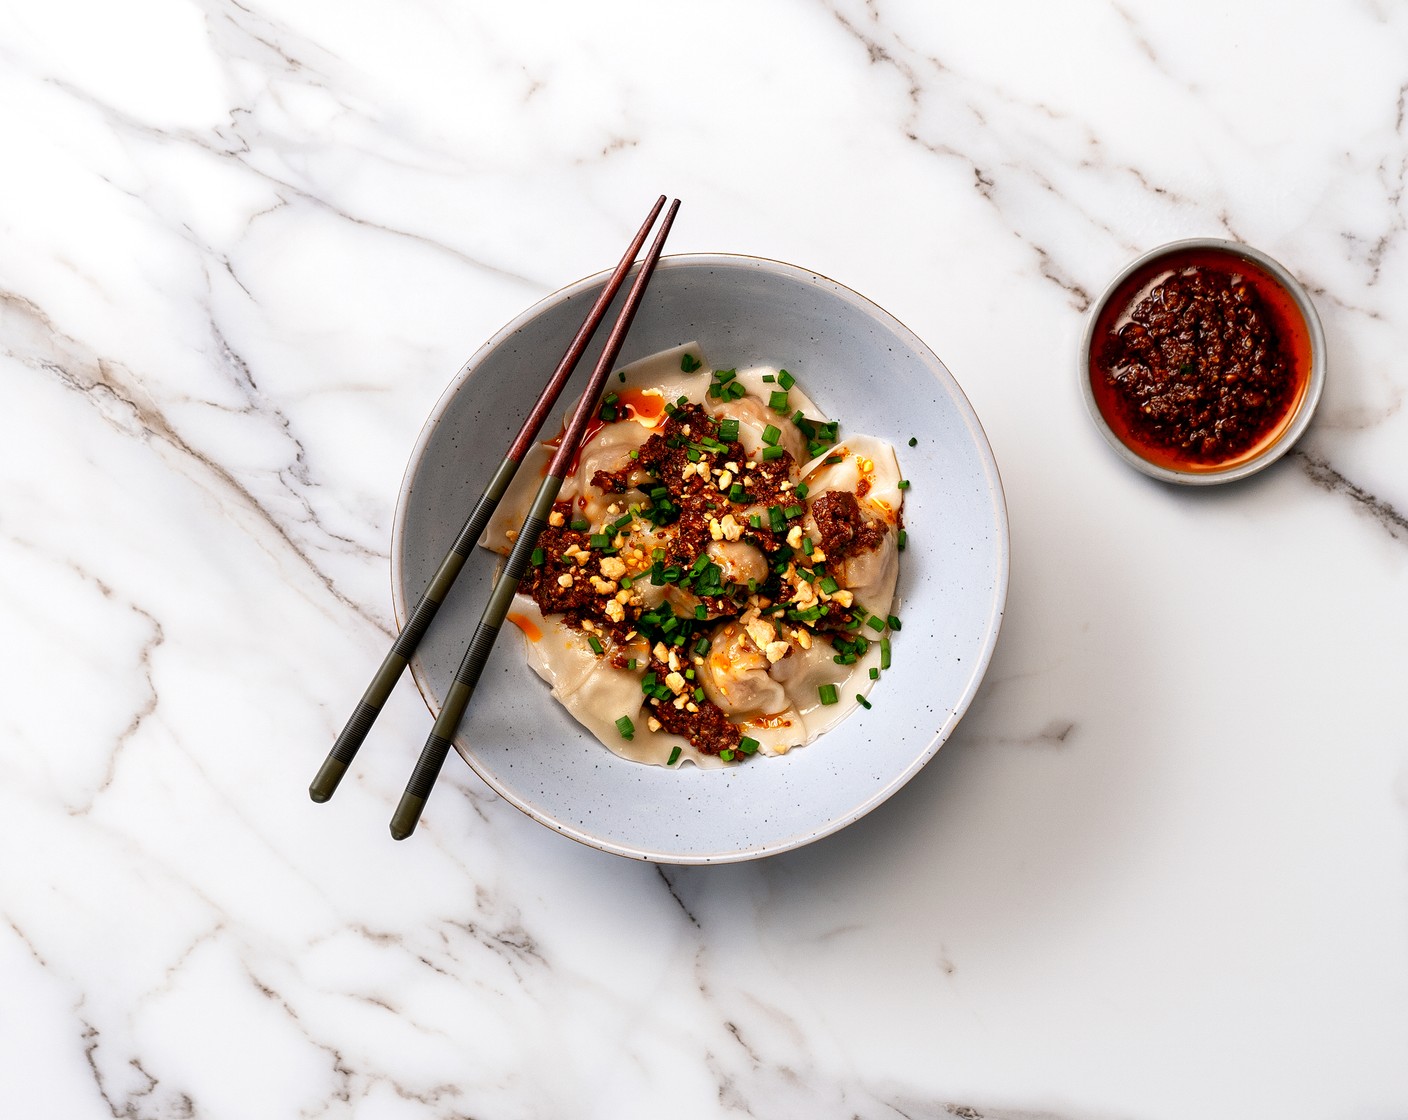 Cantonese-Style Wontons with Sichuan Chili Oil